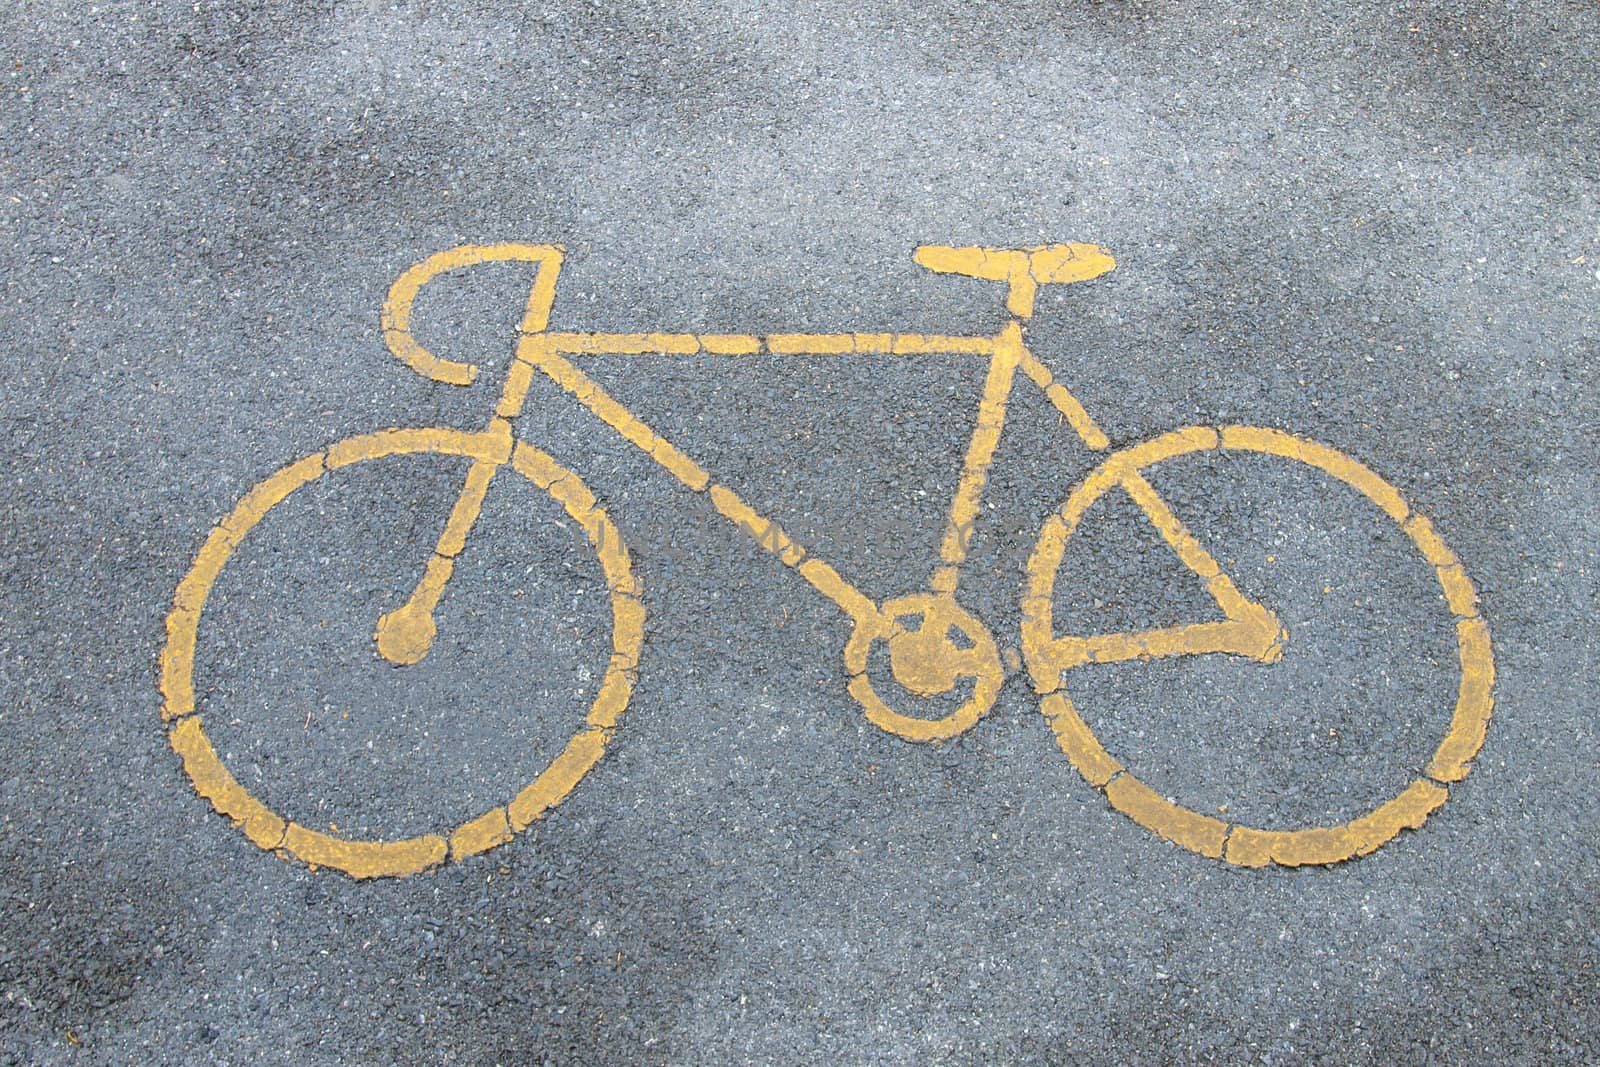 Bicycle road sign painted on the pavement by jakgree